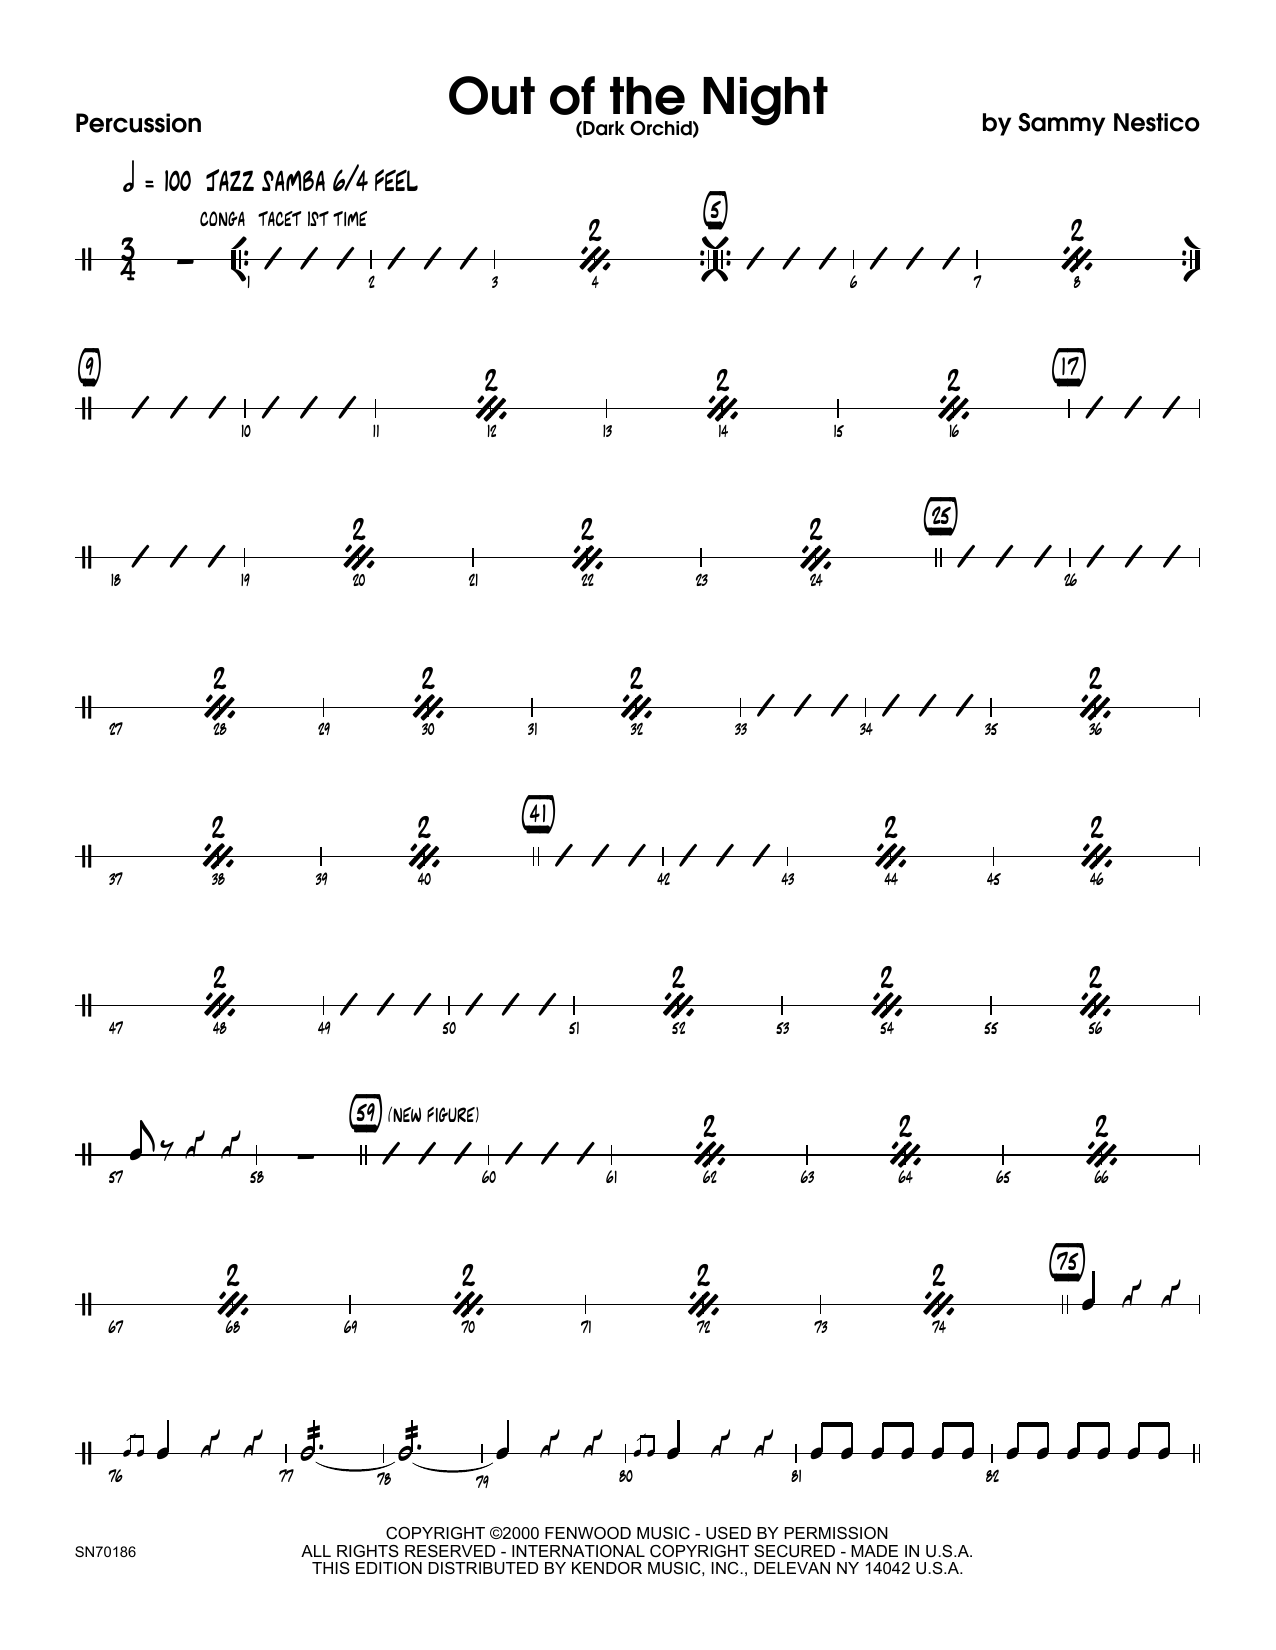 Download Sammy Nestico Out of the Night - Percussion Sheet Music